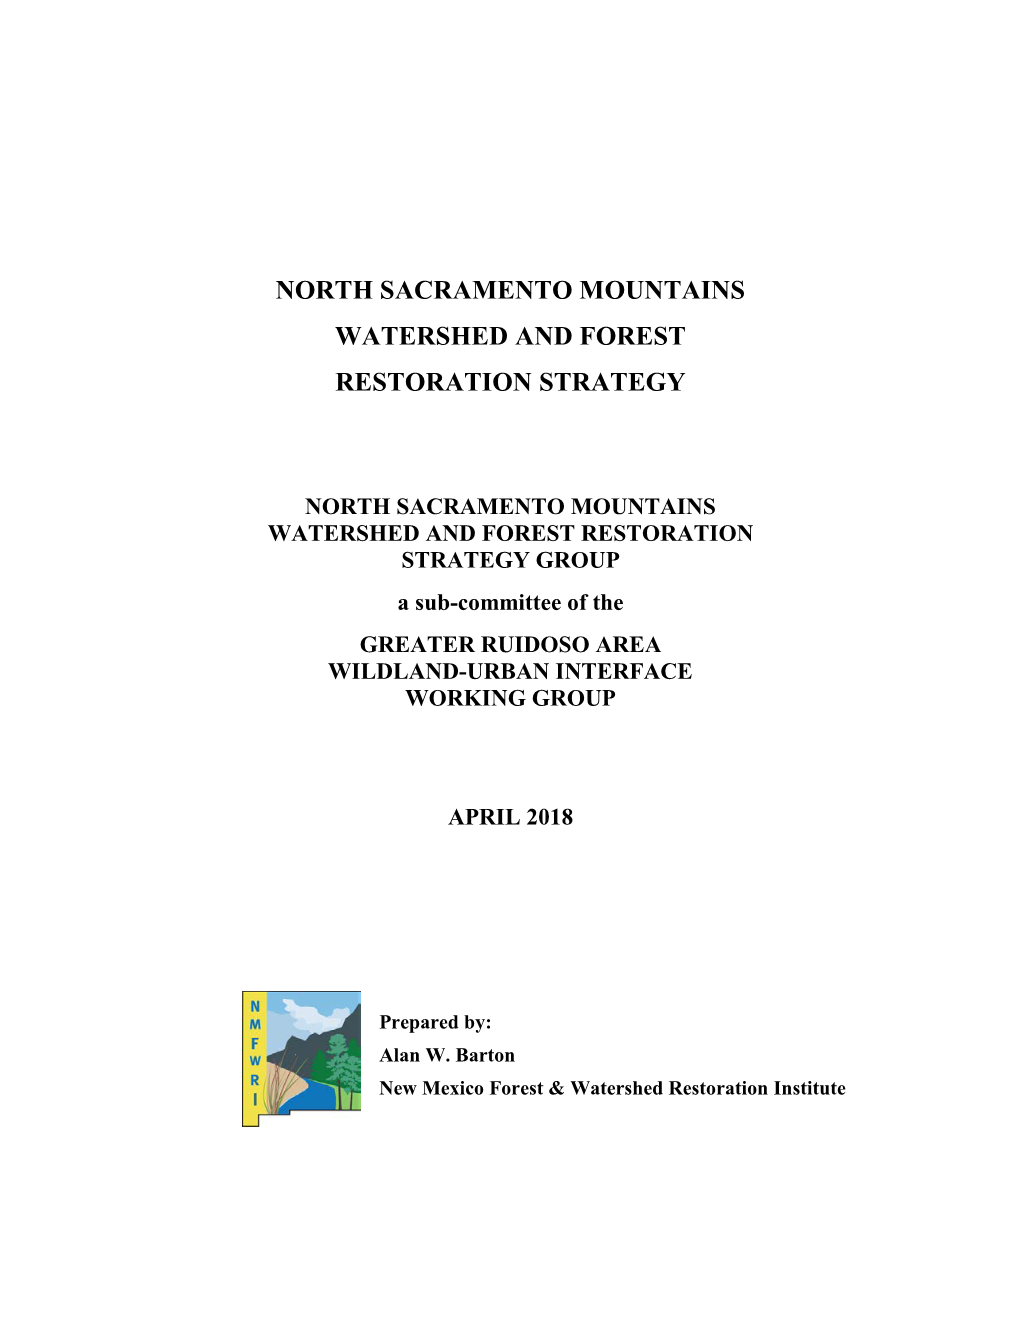 North Sacramento Mountains Watershed and Forest Restoration Strategy